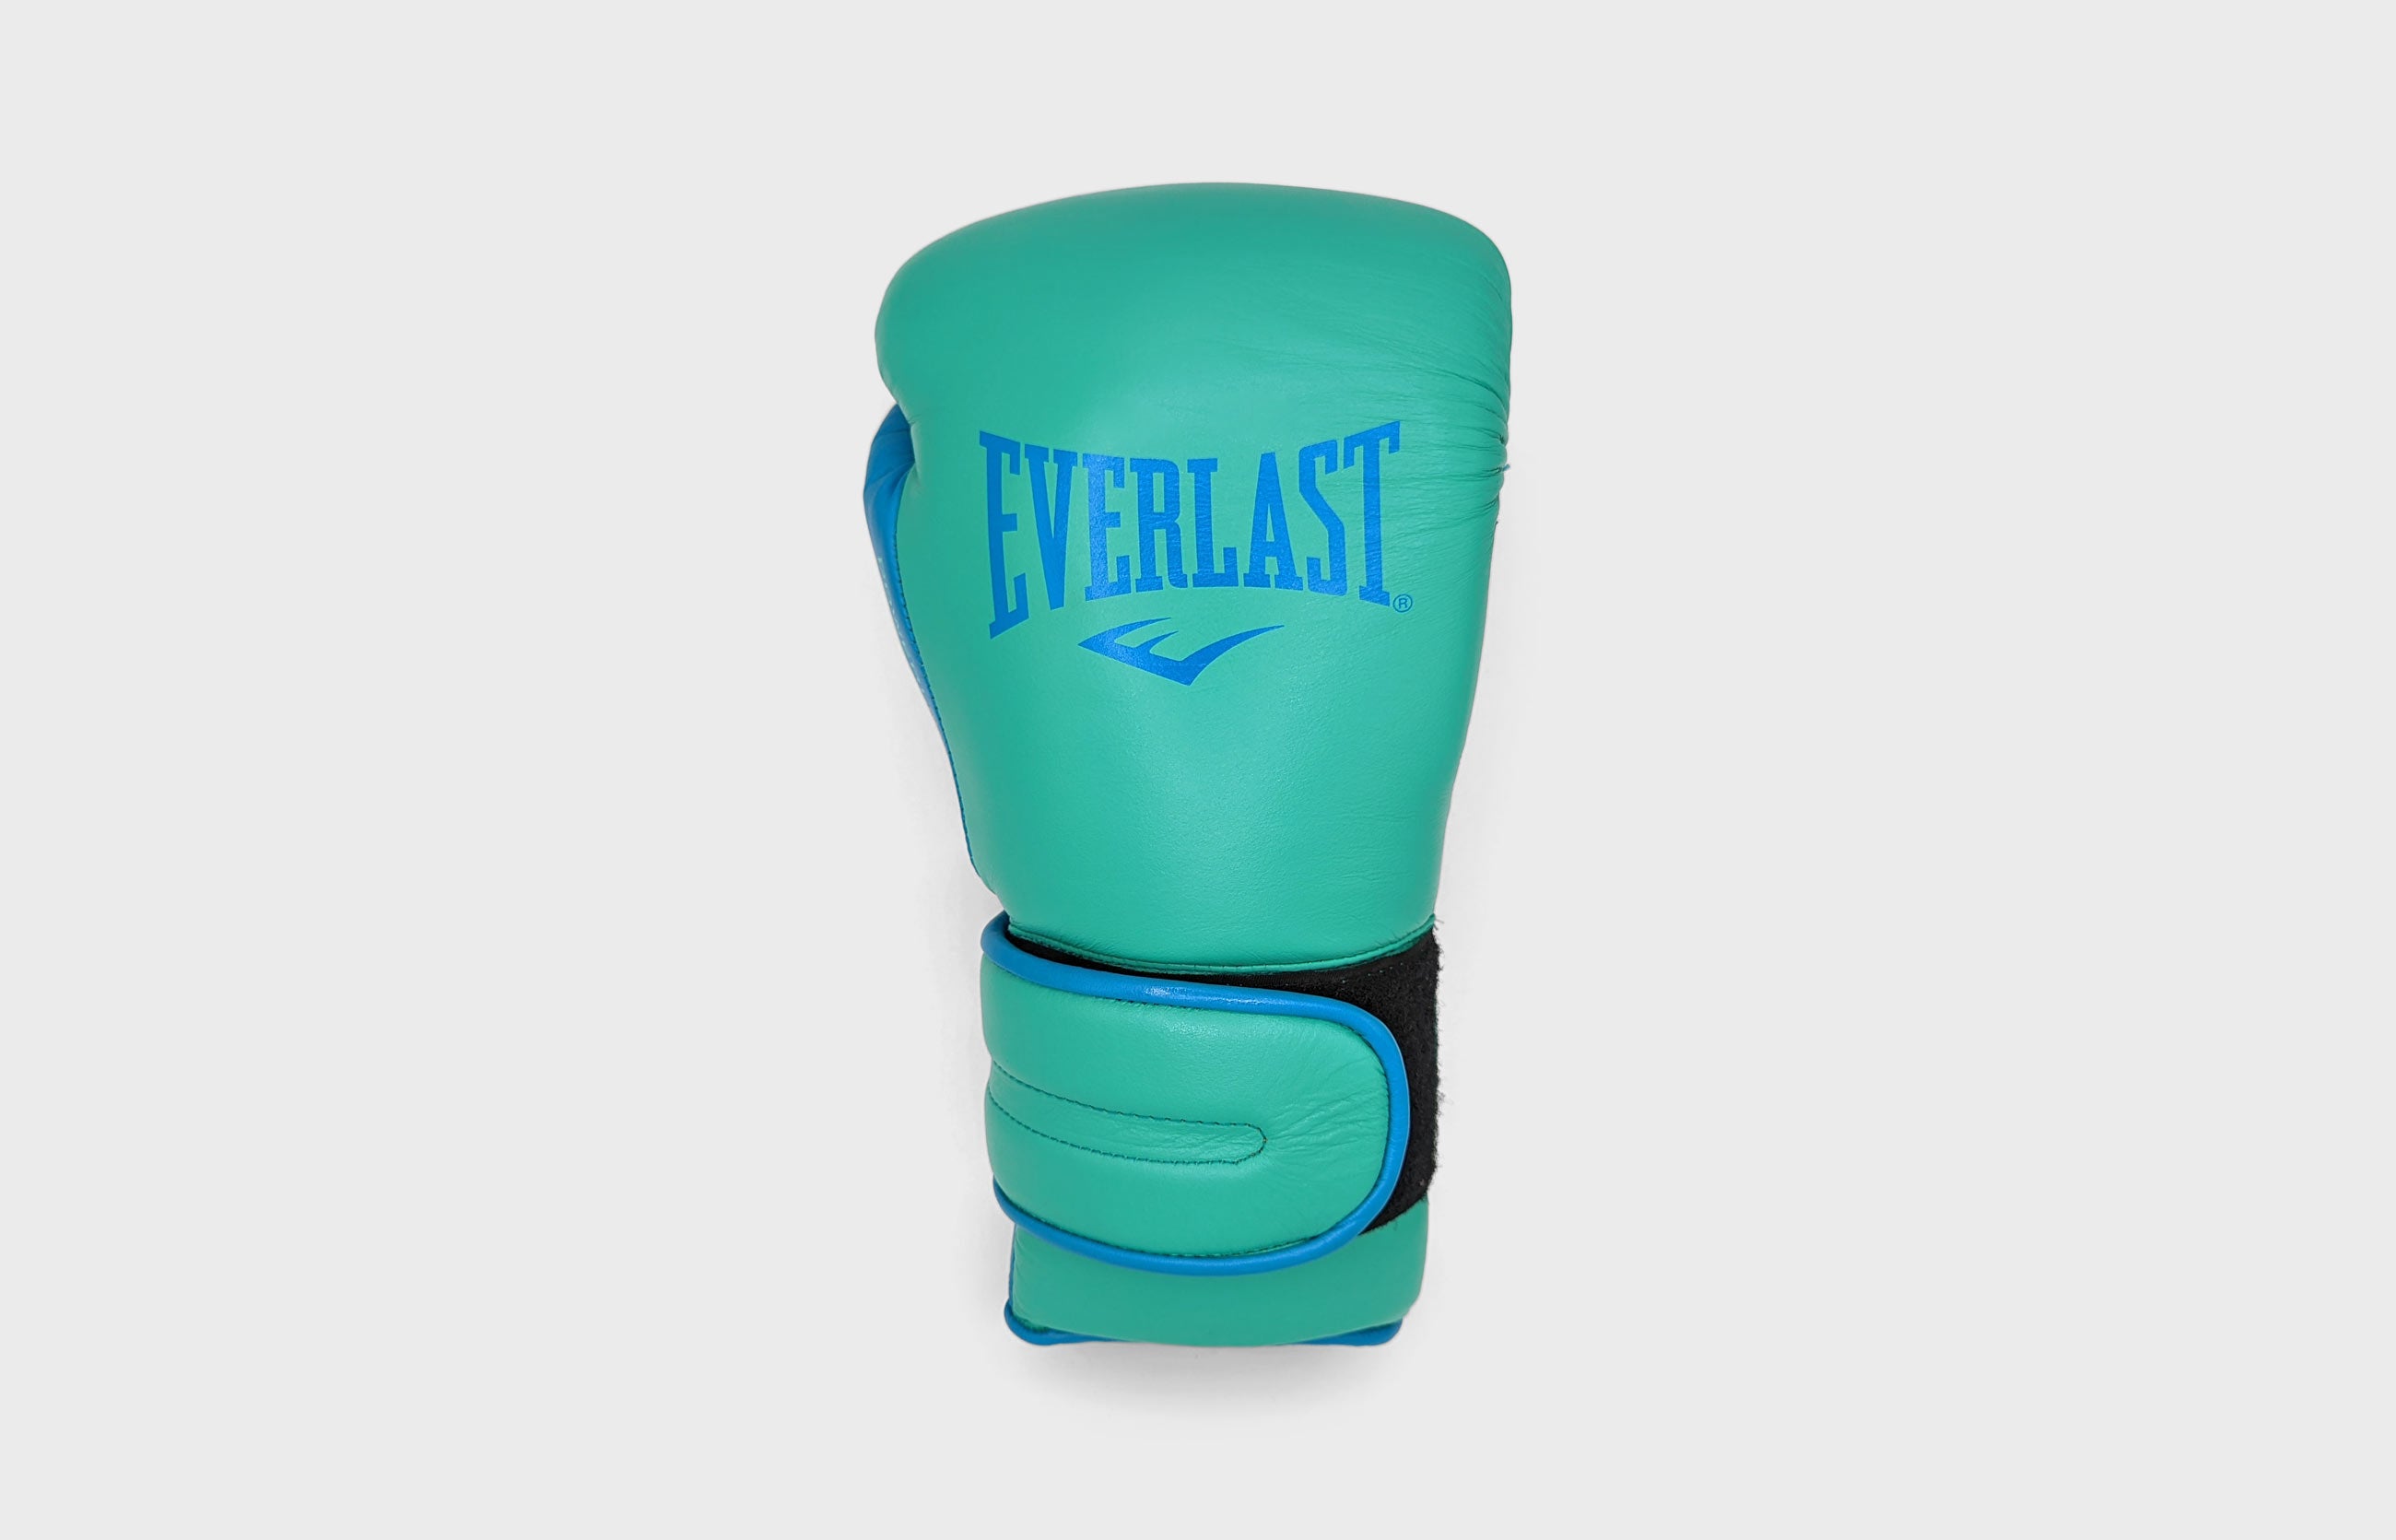 Everlast powerlock2 pro boxing glove. A teal boxing glove